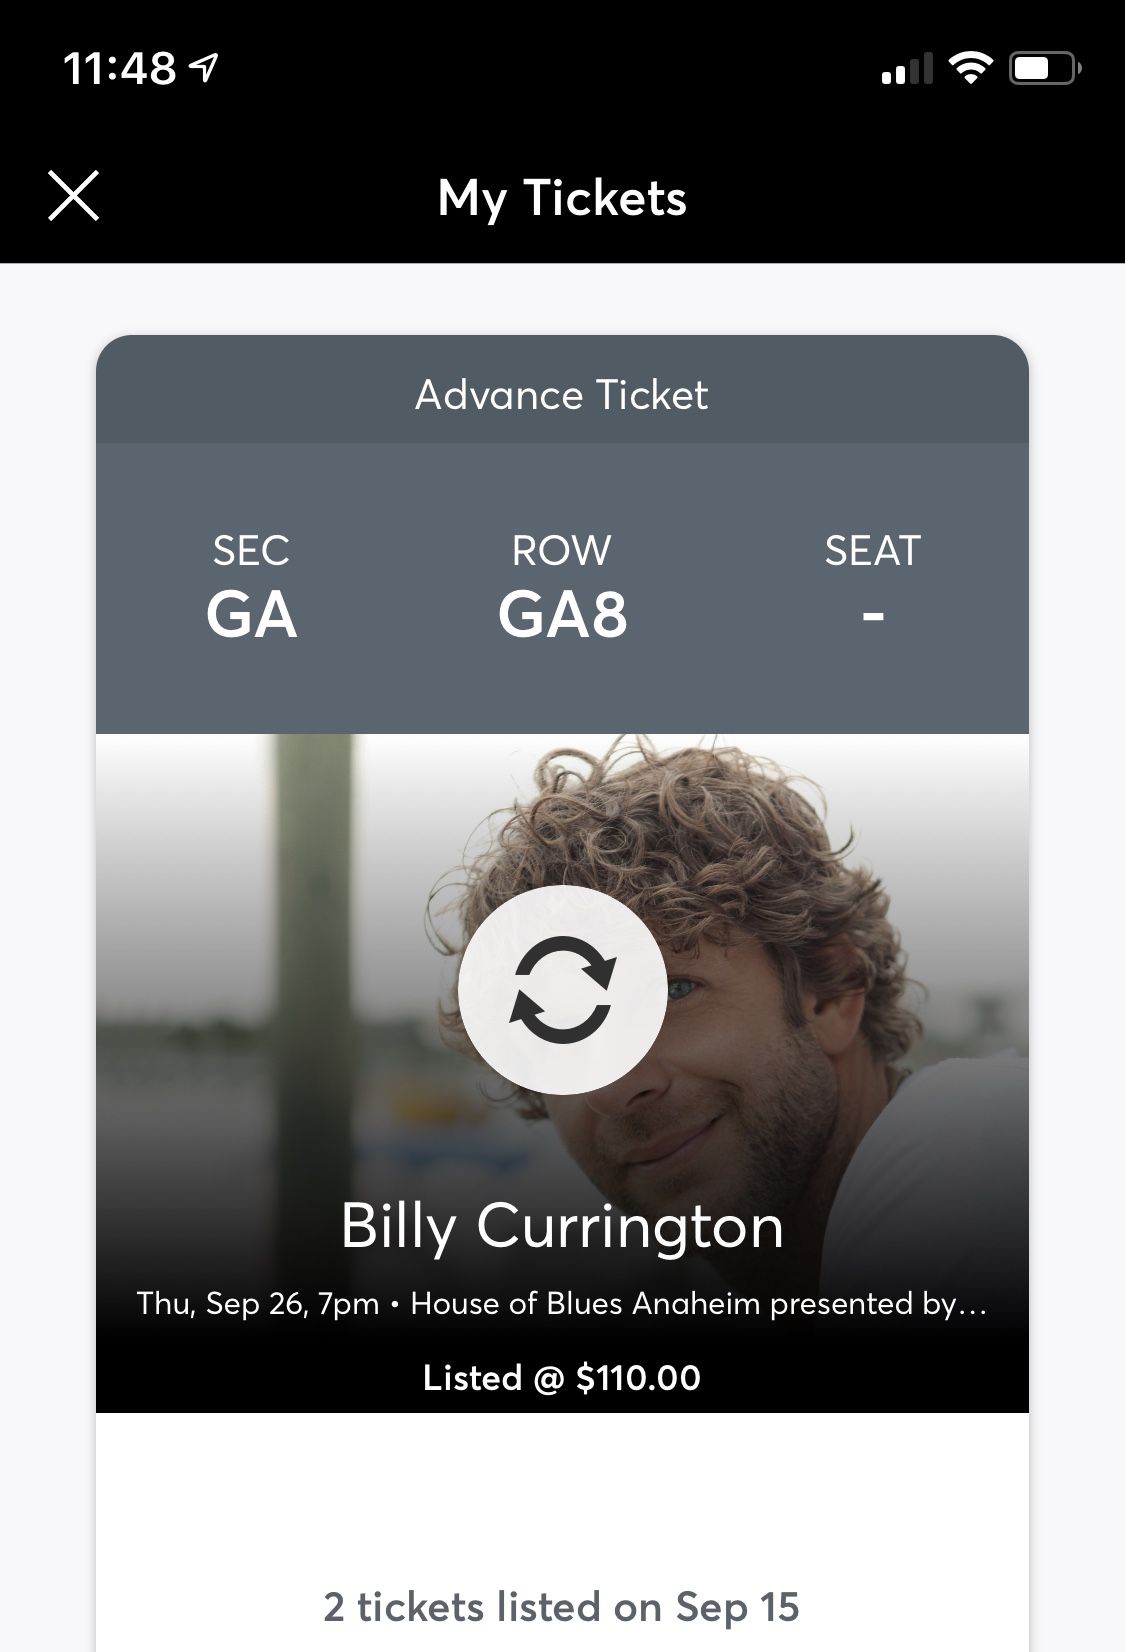 Billy Currington Tickets price is for 2 tix